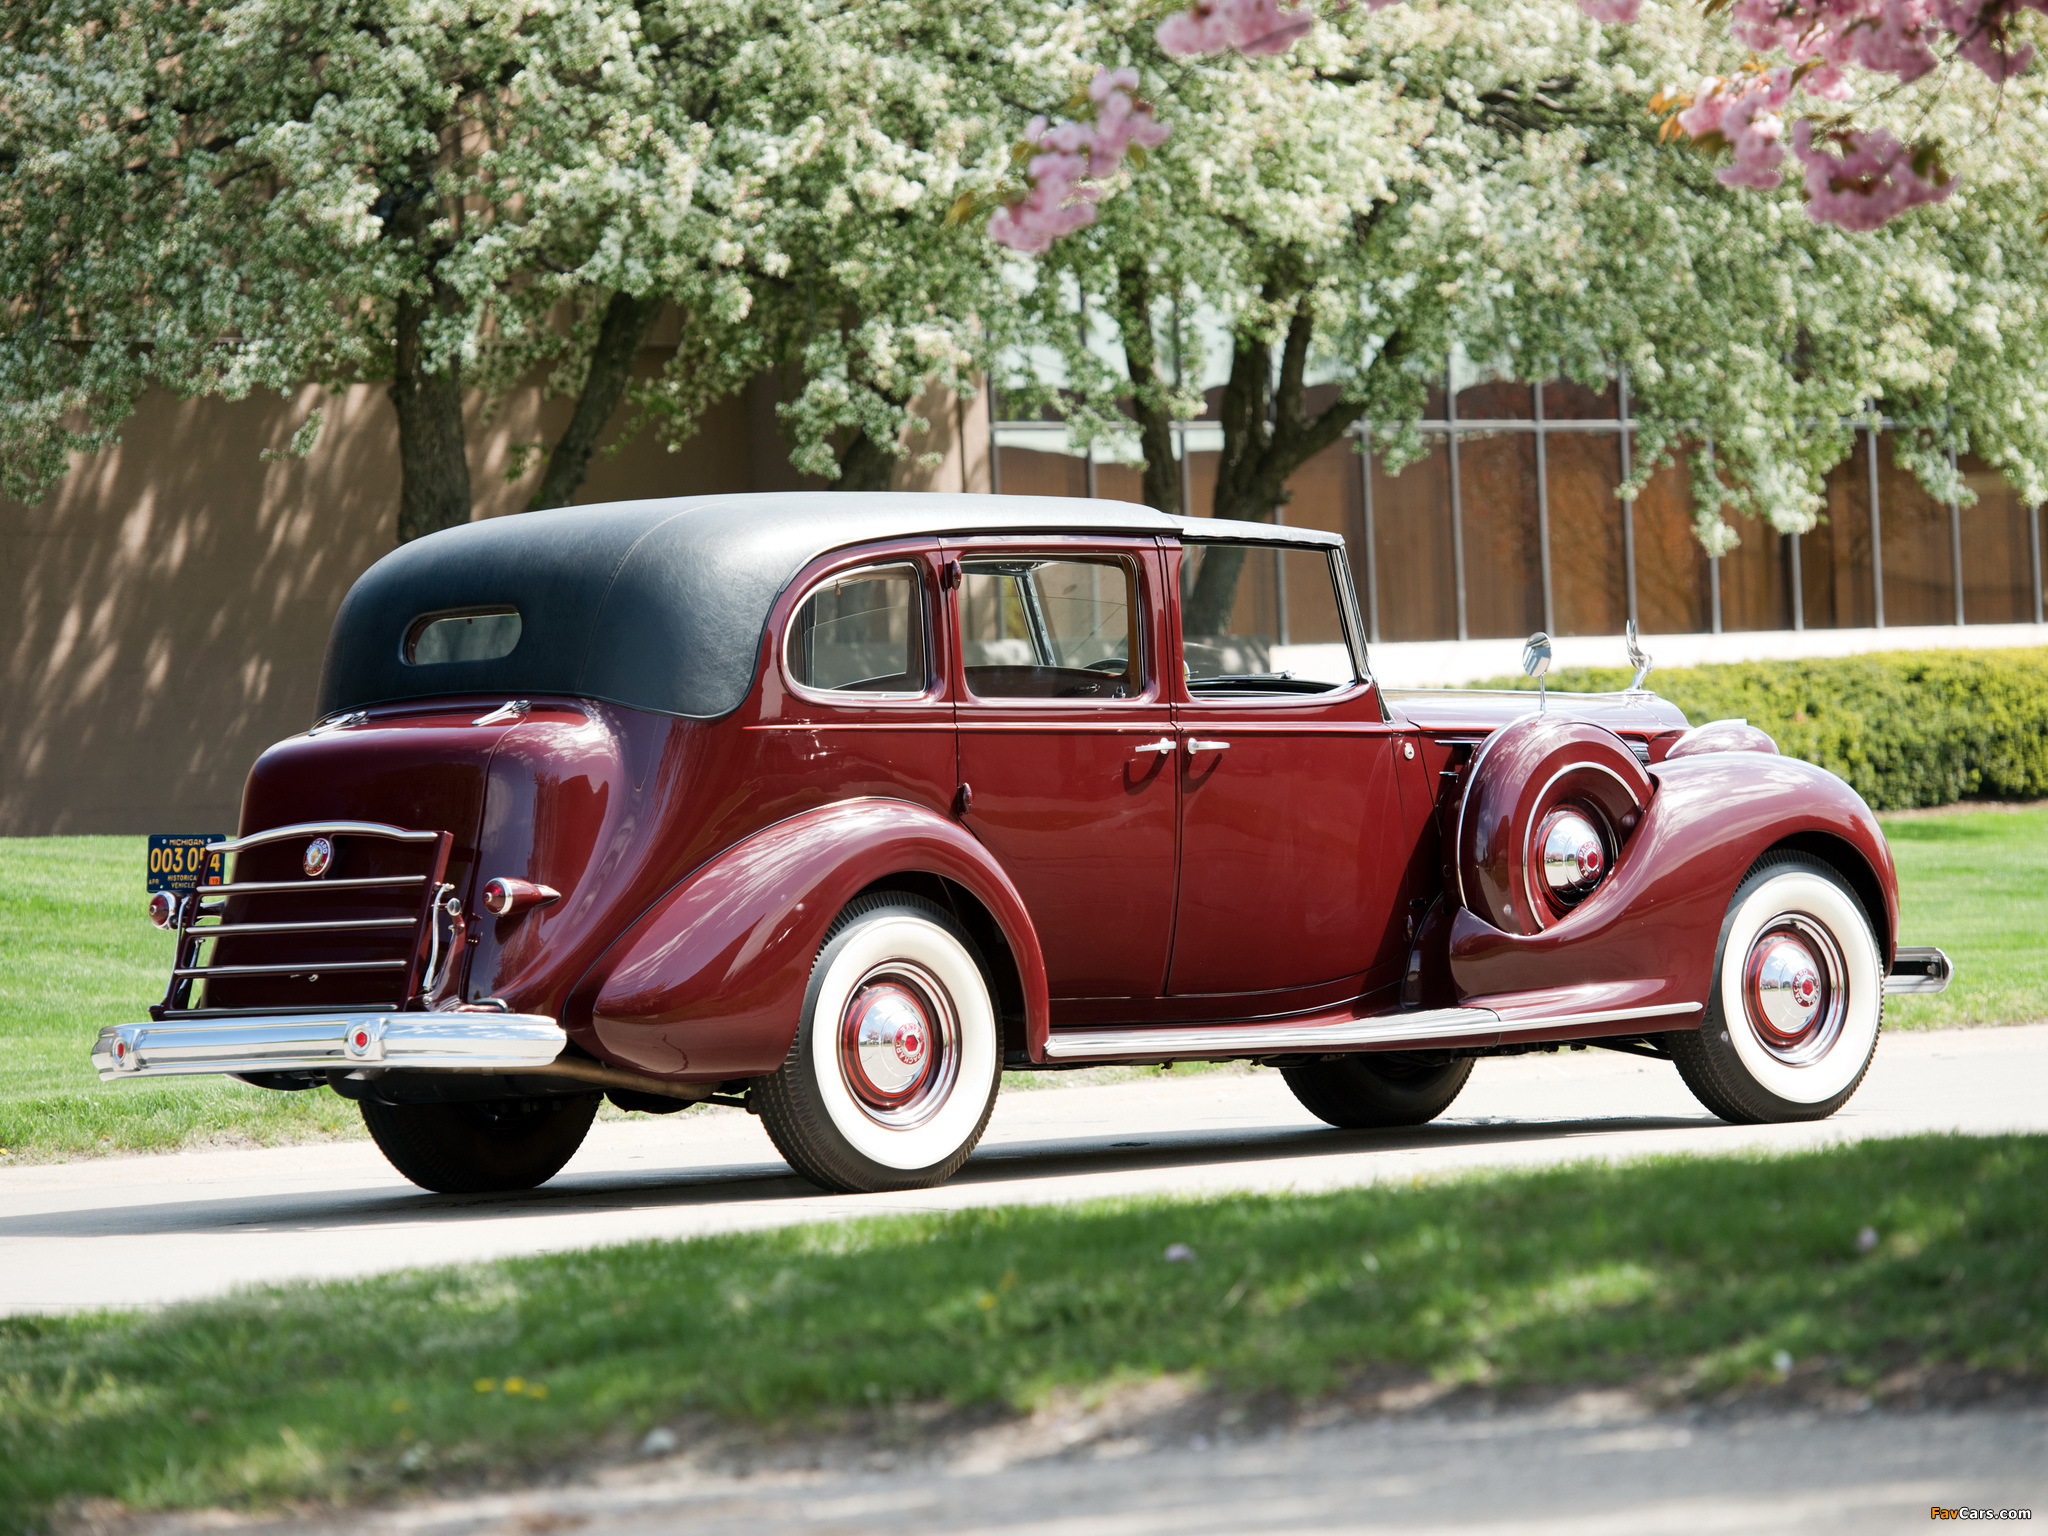 Images of 1938 Packard Twelve All-Weather Town Car by Rollston (1608-495) (2048 x 1536)